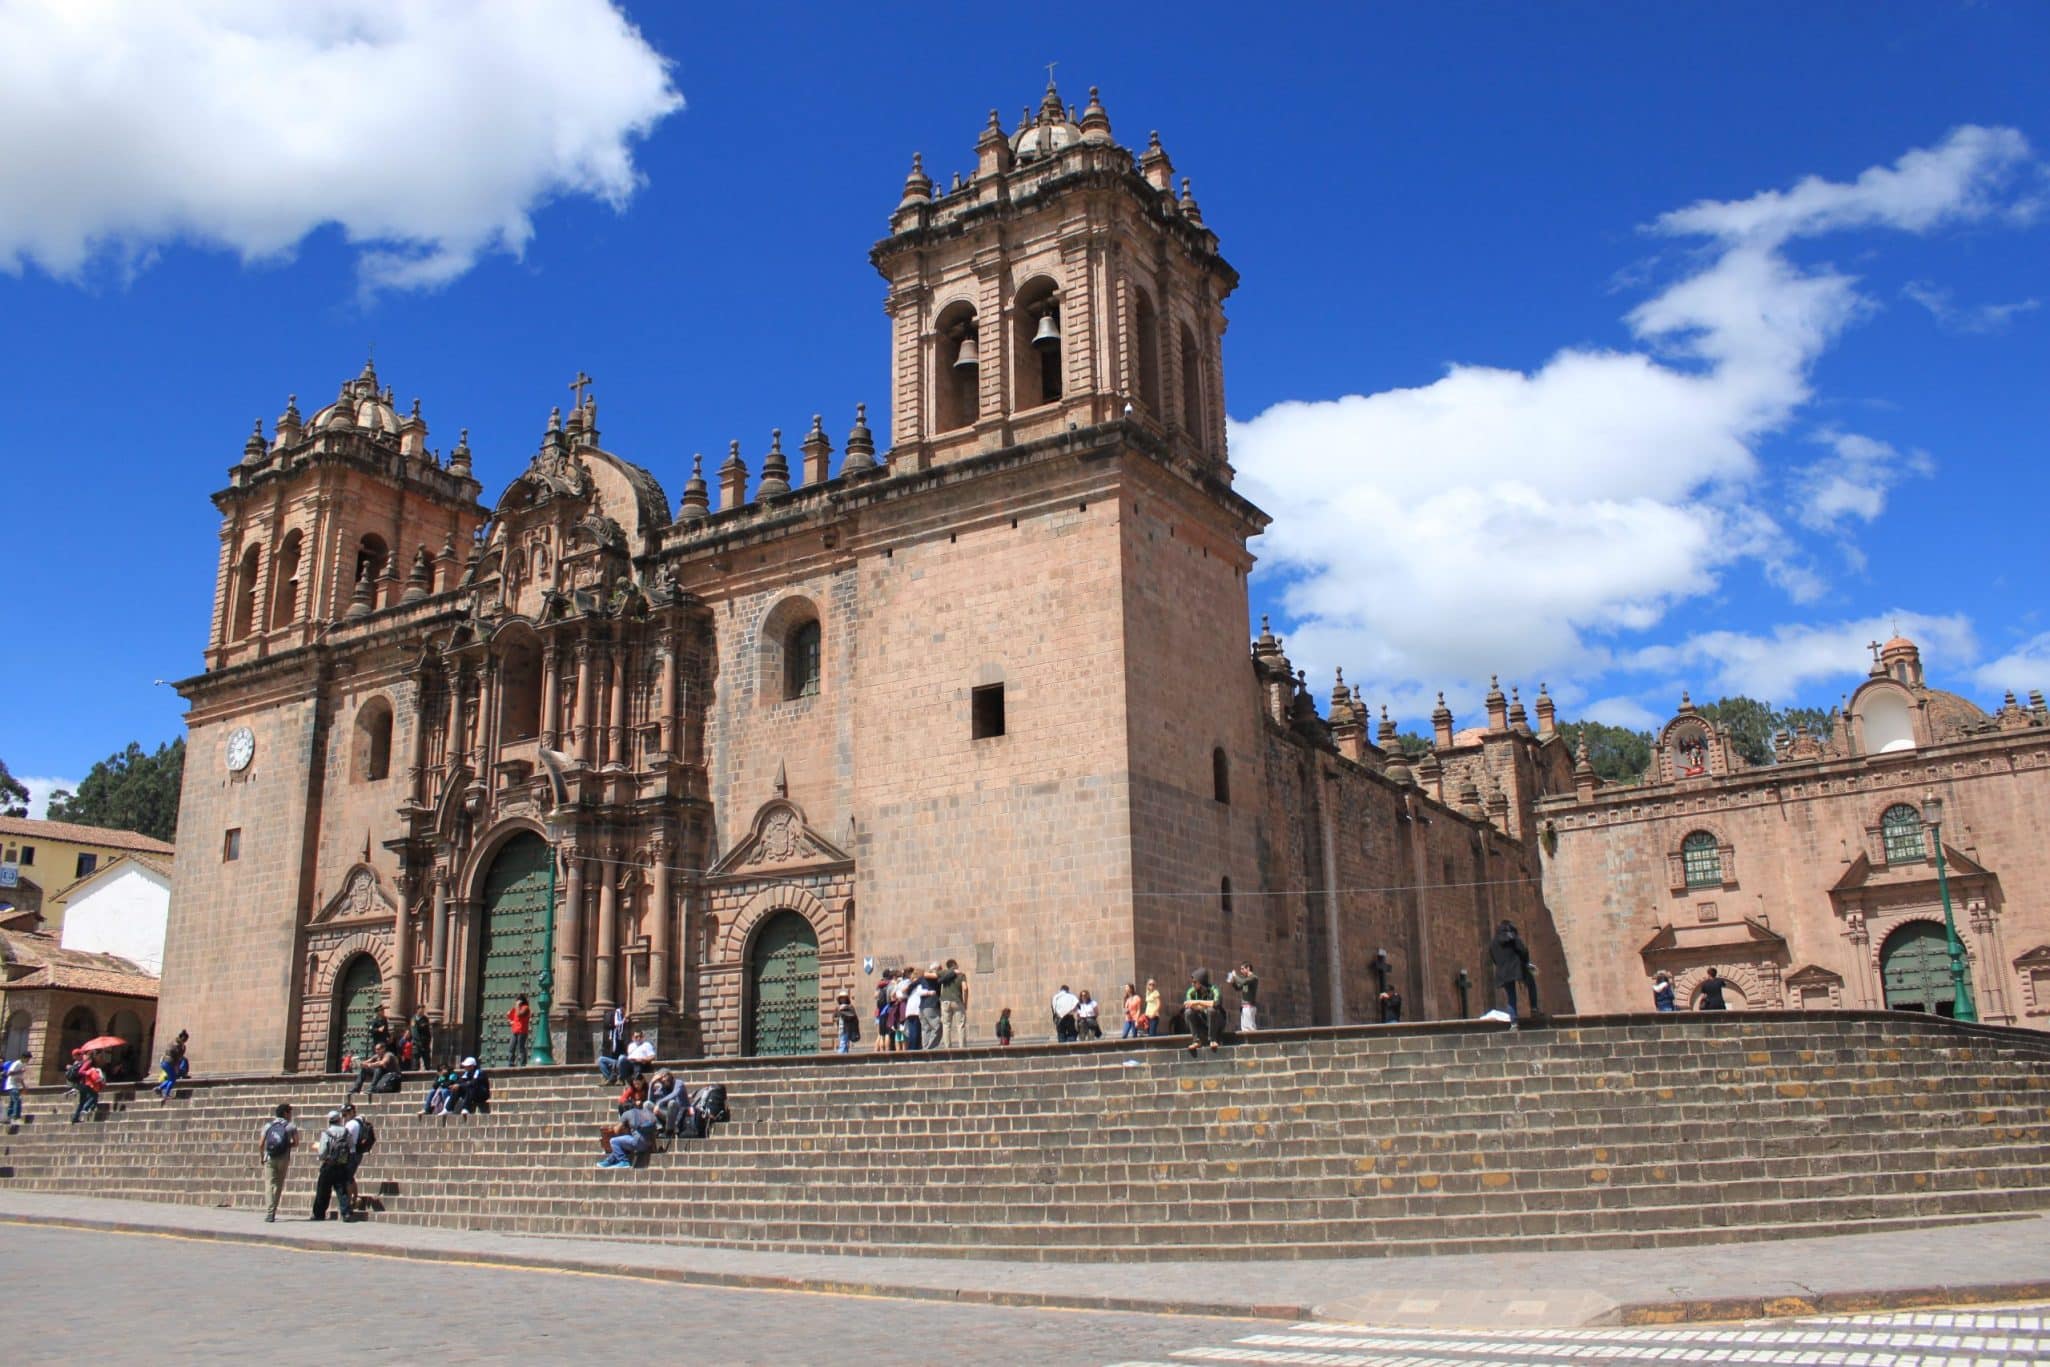 8 things to do in Cusco, Peru (besides hiking the Inca Trail)